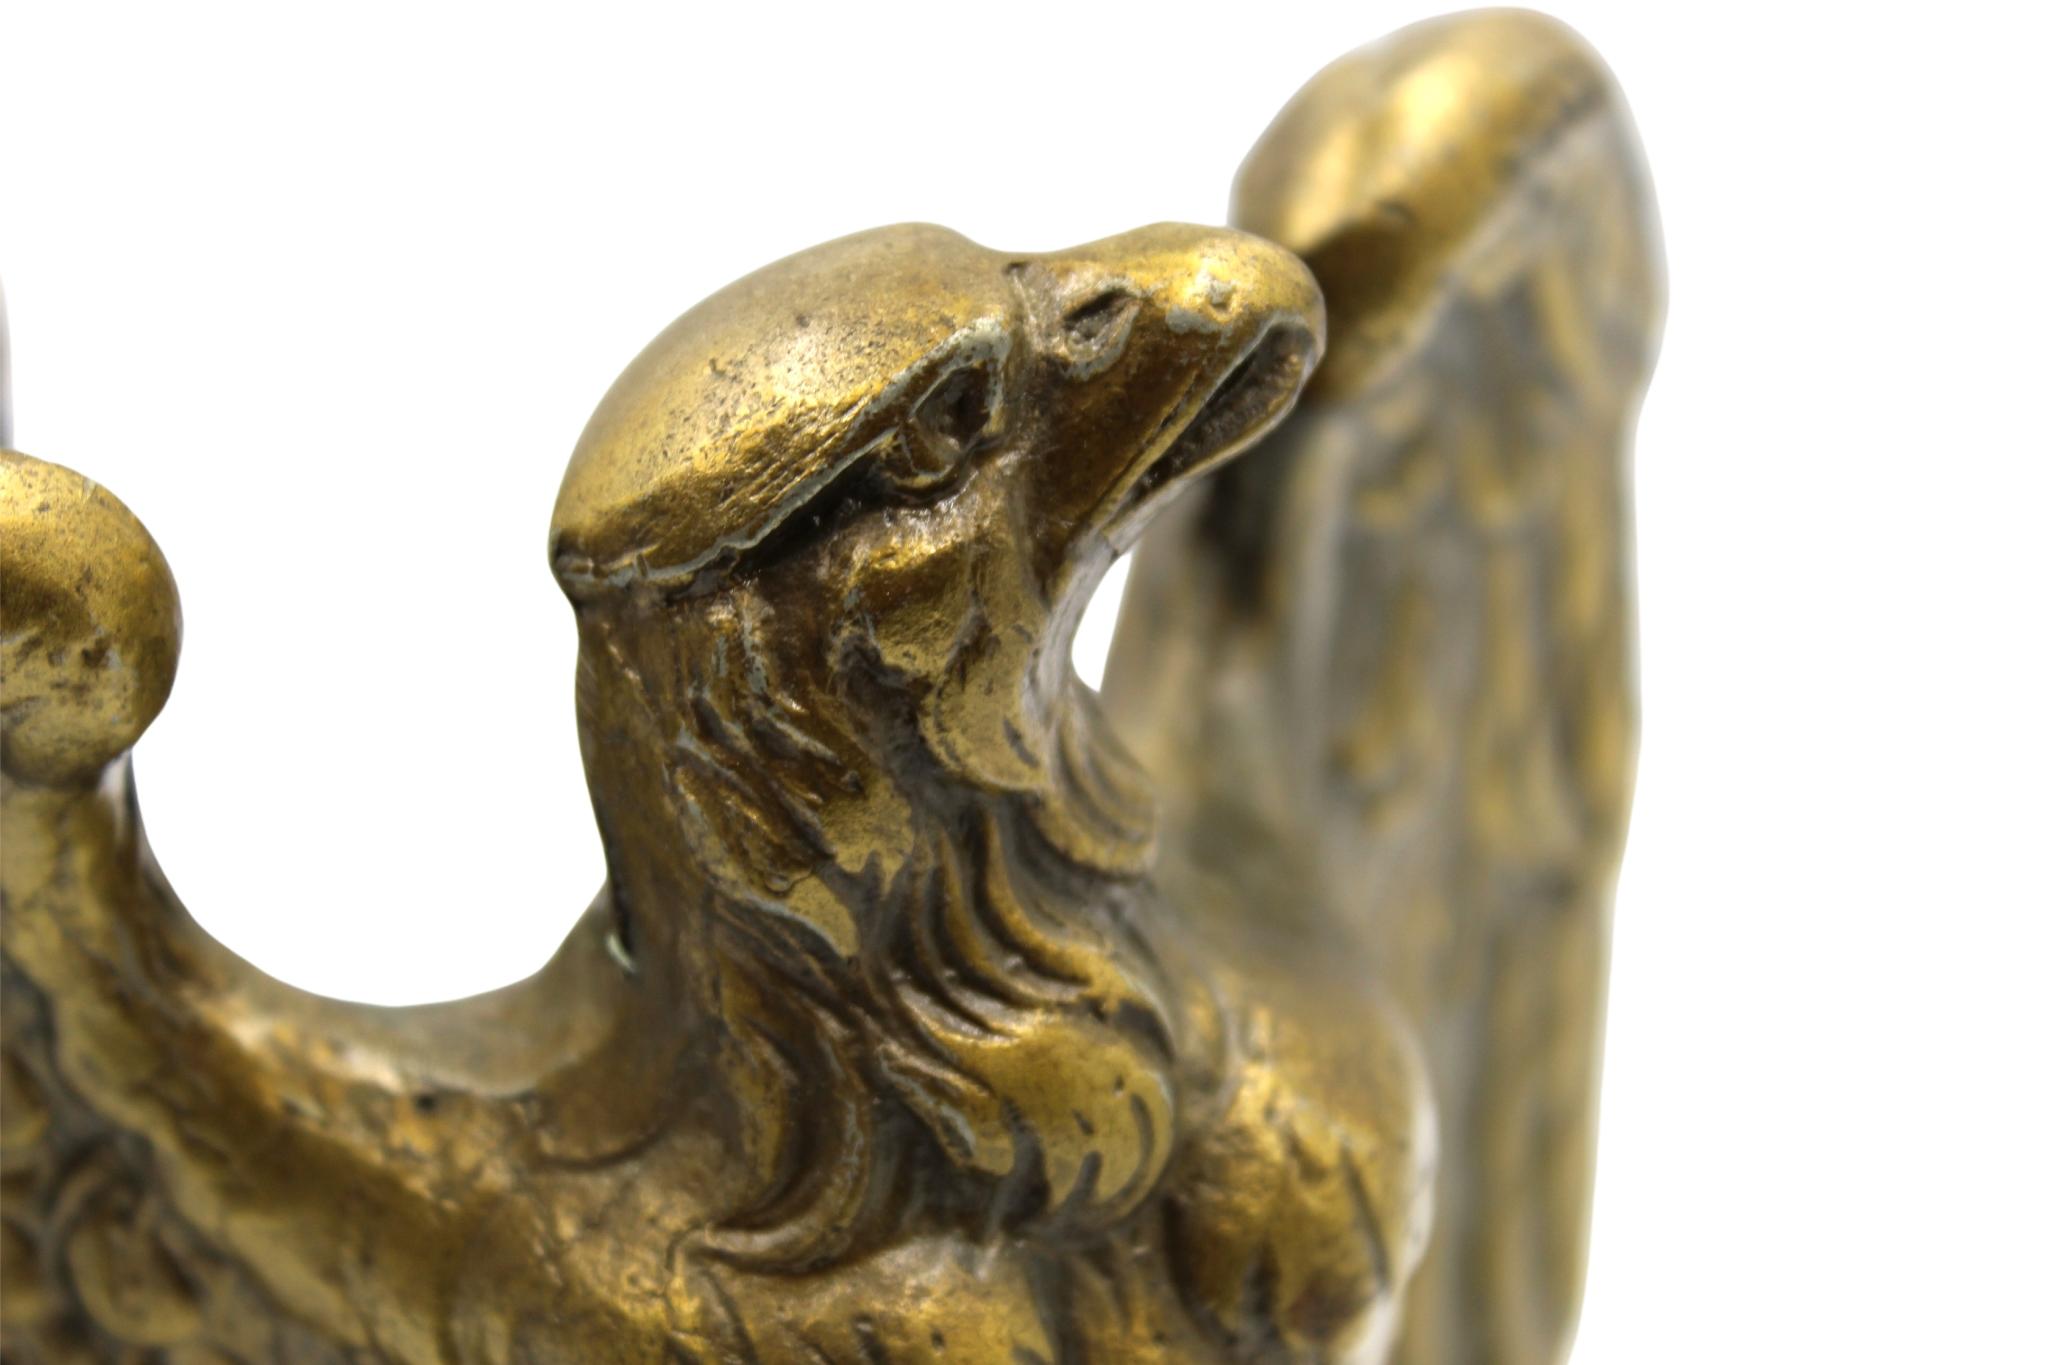 These appealing vintage brass bookends depict a bald eagle preparing for flight after perching on a base inscribed with “1776.” The bookends were made by Colonial Virginia, a crafter working out of Hampton, Virginia in 1972. The realistic detail of